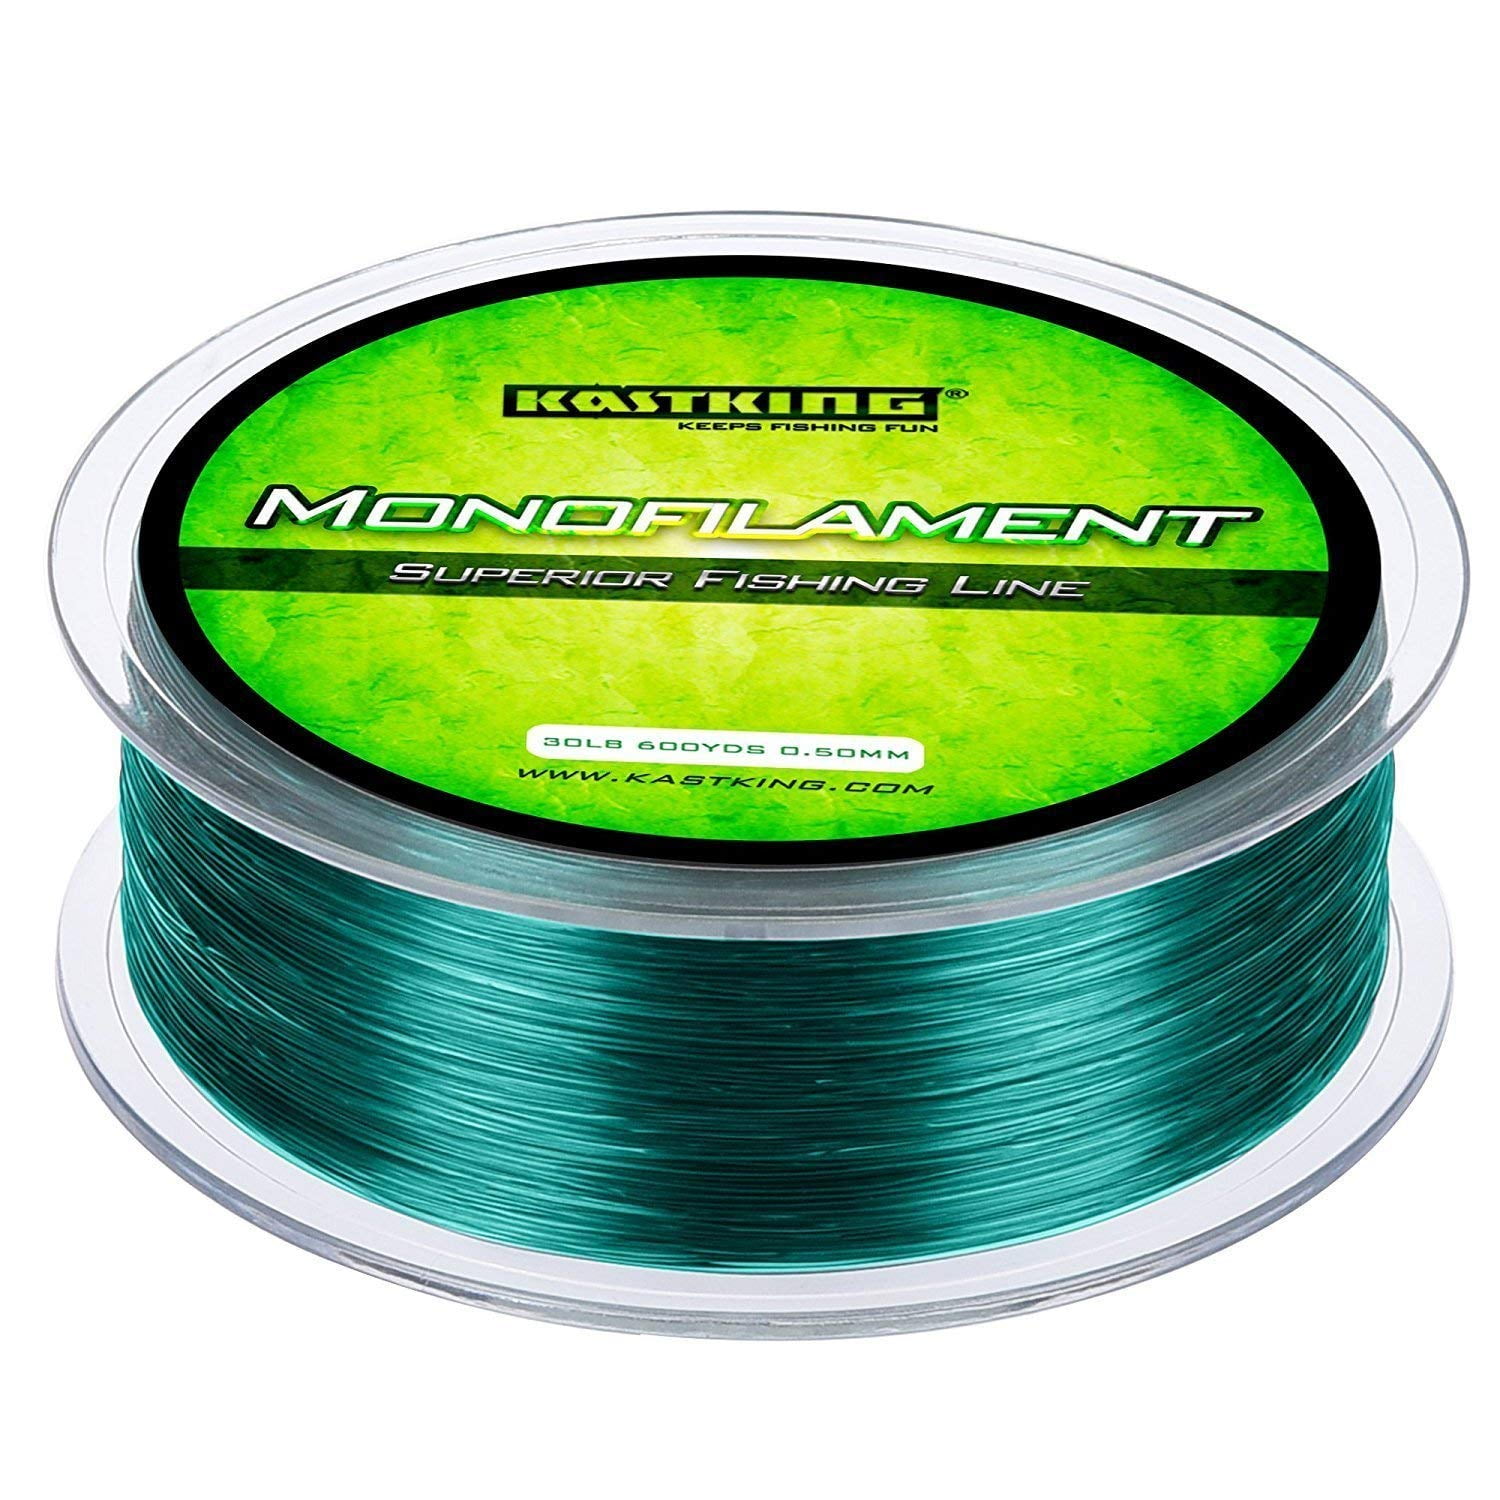 Paralleled Roll Track KastKing World's Premium Monofilament Fishing Line 